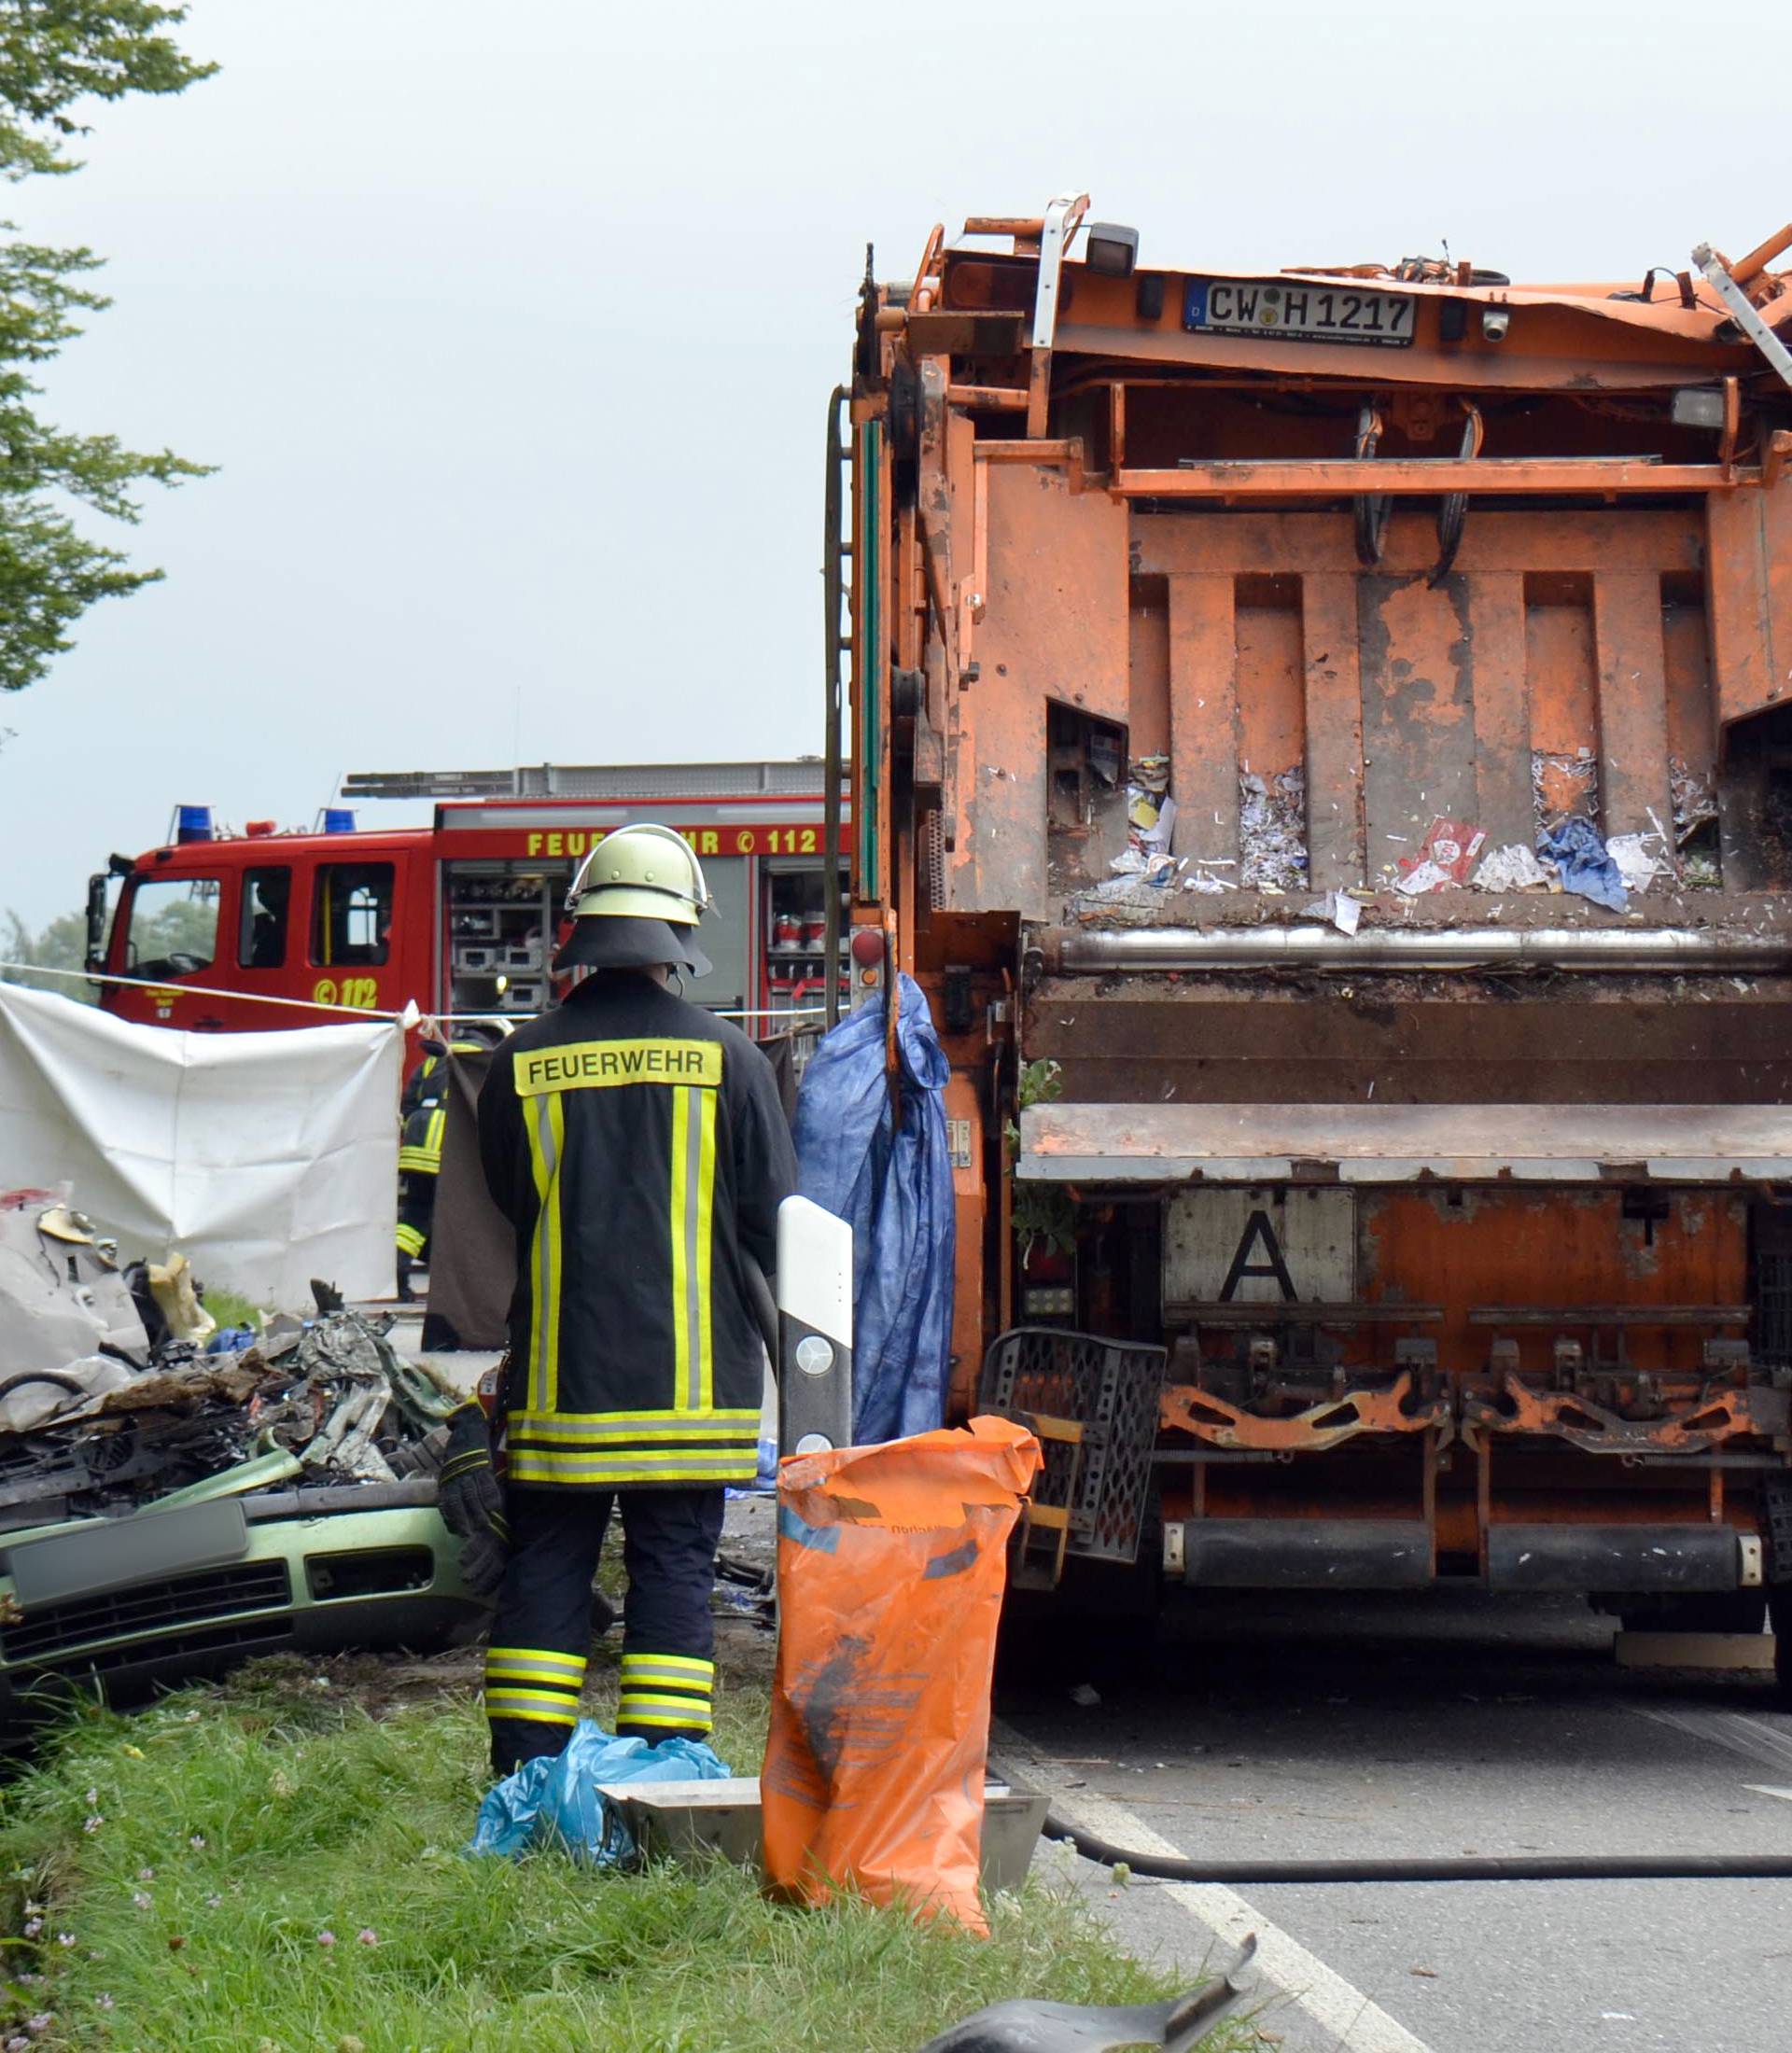 Dustbin lorry accident